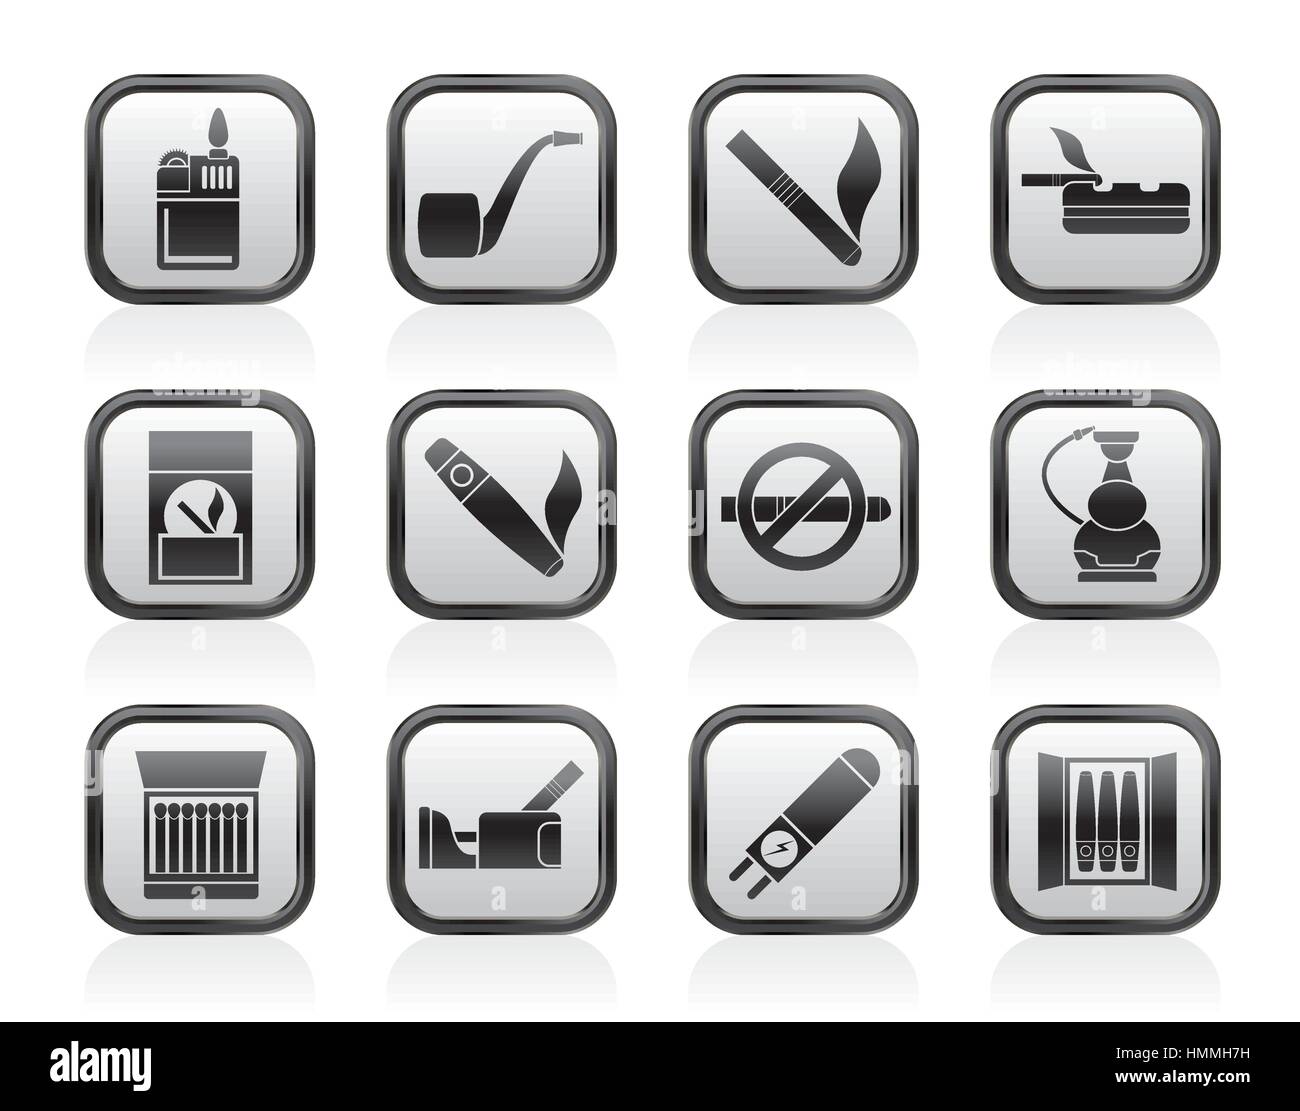 Smoking and cigarette icons Stock Vector